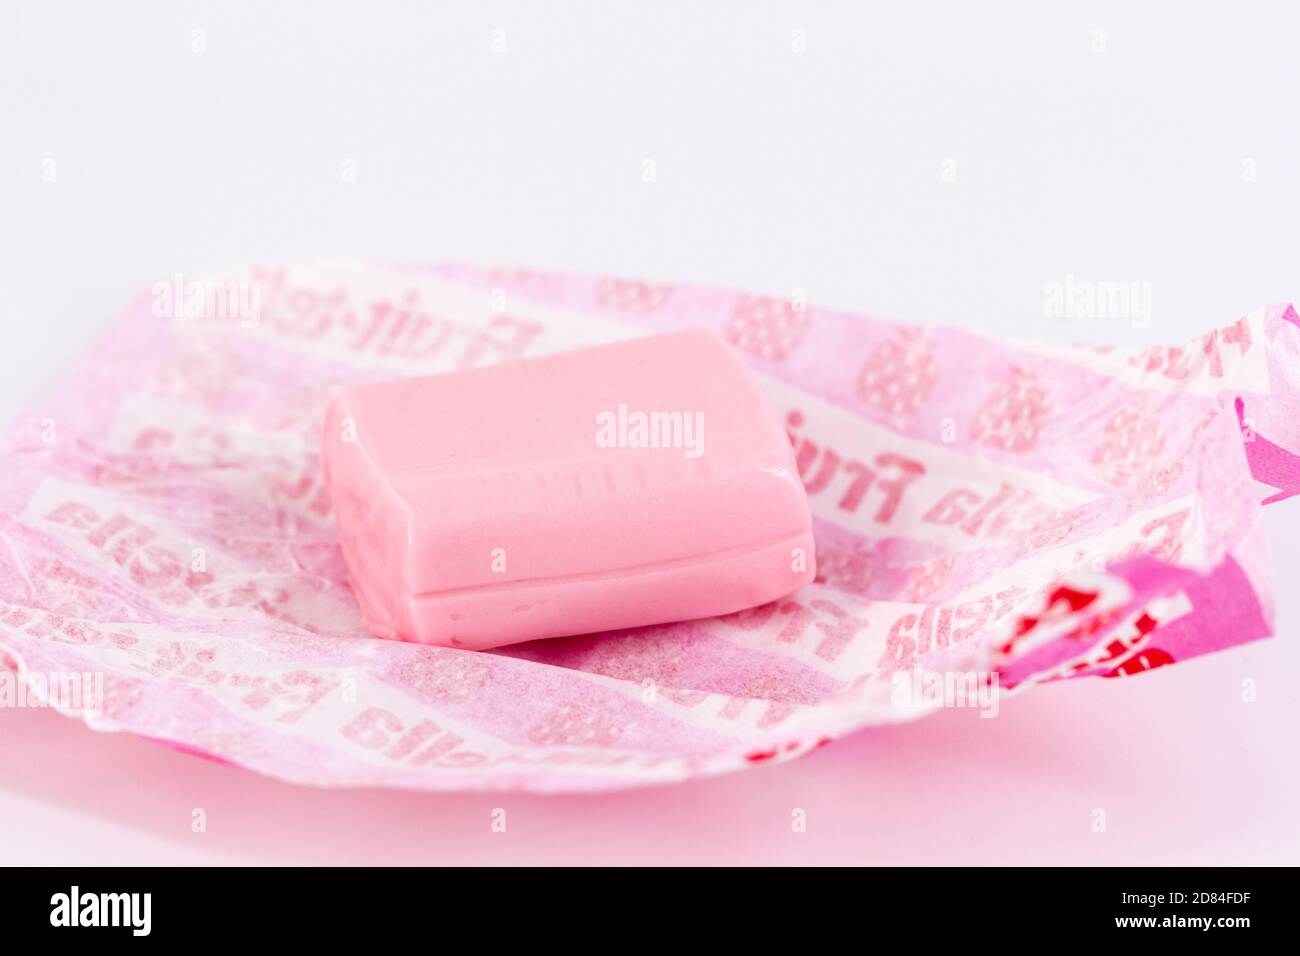 Fruit-tella pink chewy sweet unwrapped Stock Photo